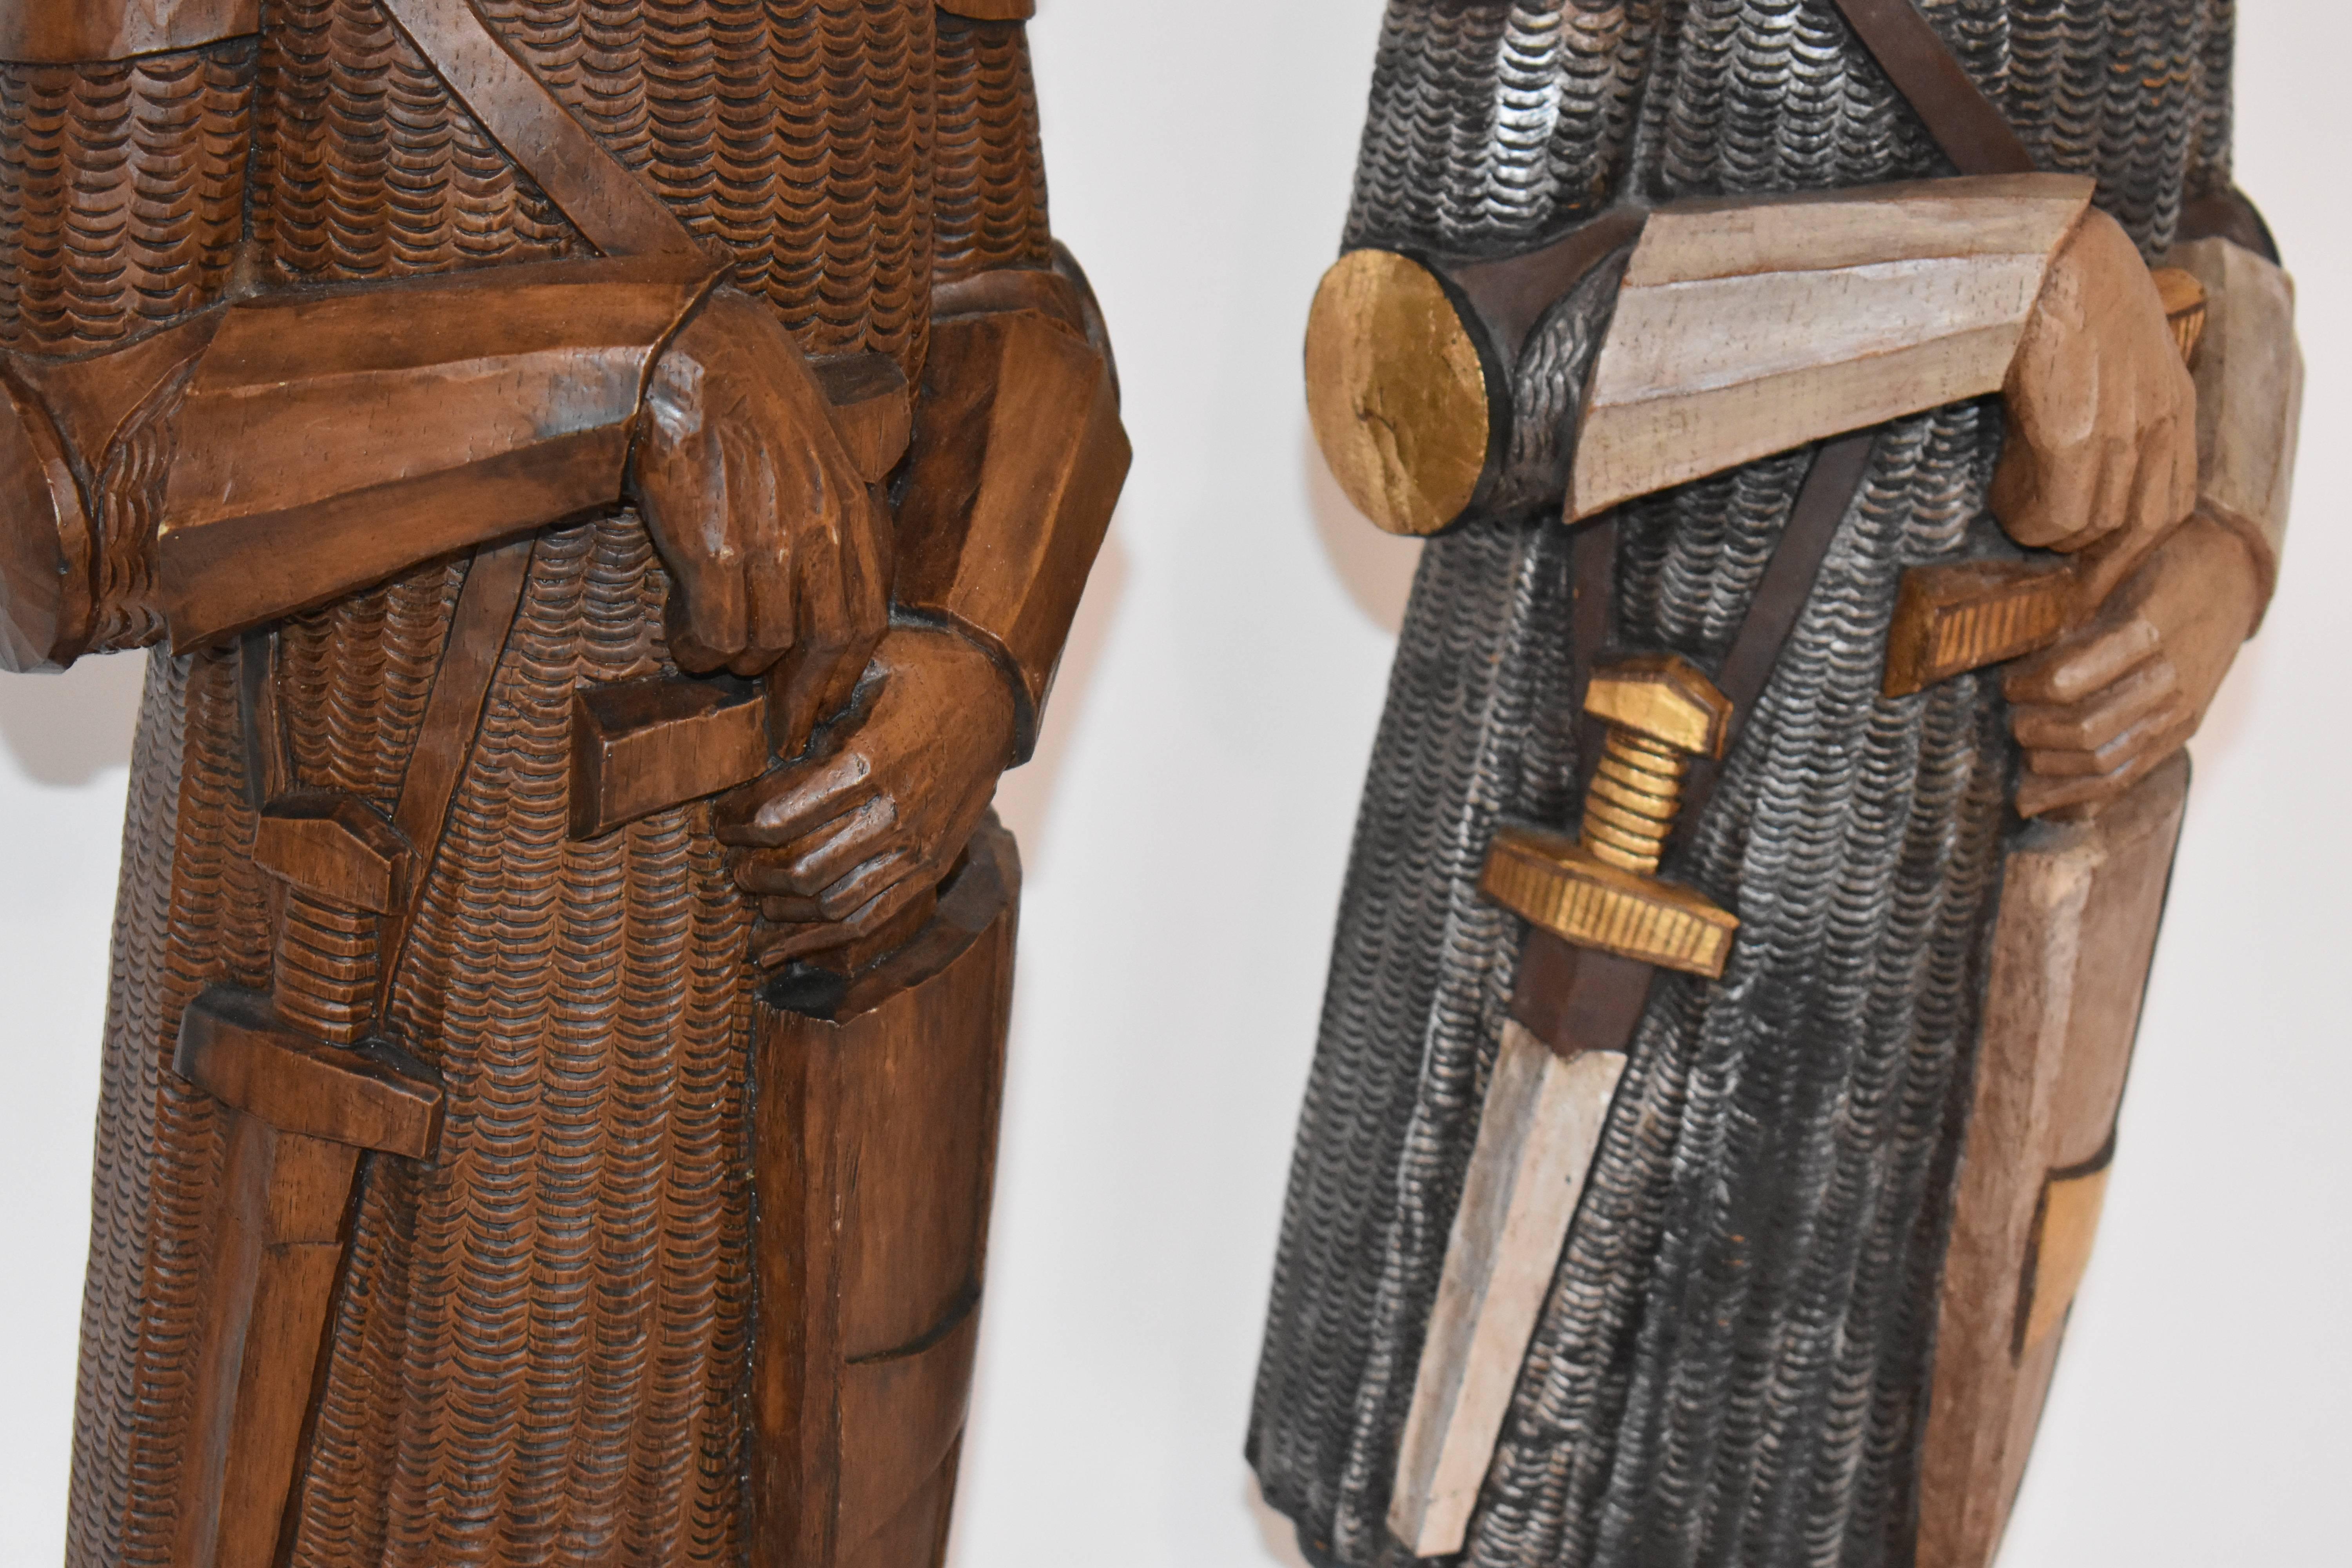 Antique large medieval crusader knight sculptures handmade from carved wood and polychrome

These impressive hand-carved crusader knight sculptures date from the 1940s. The polychrome knight is painted in suiting colors and has a lifelike expression